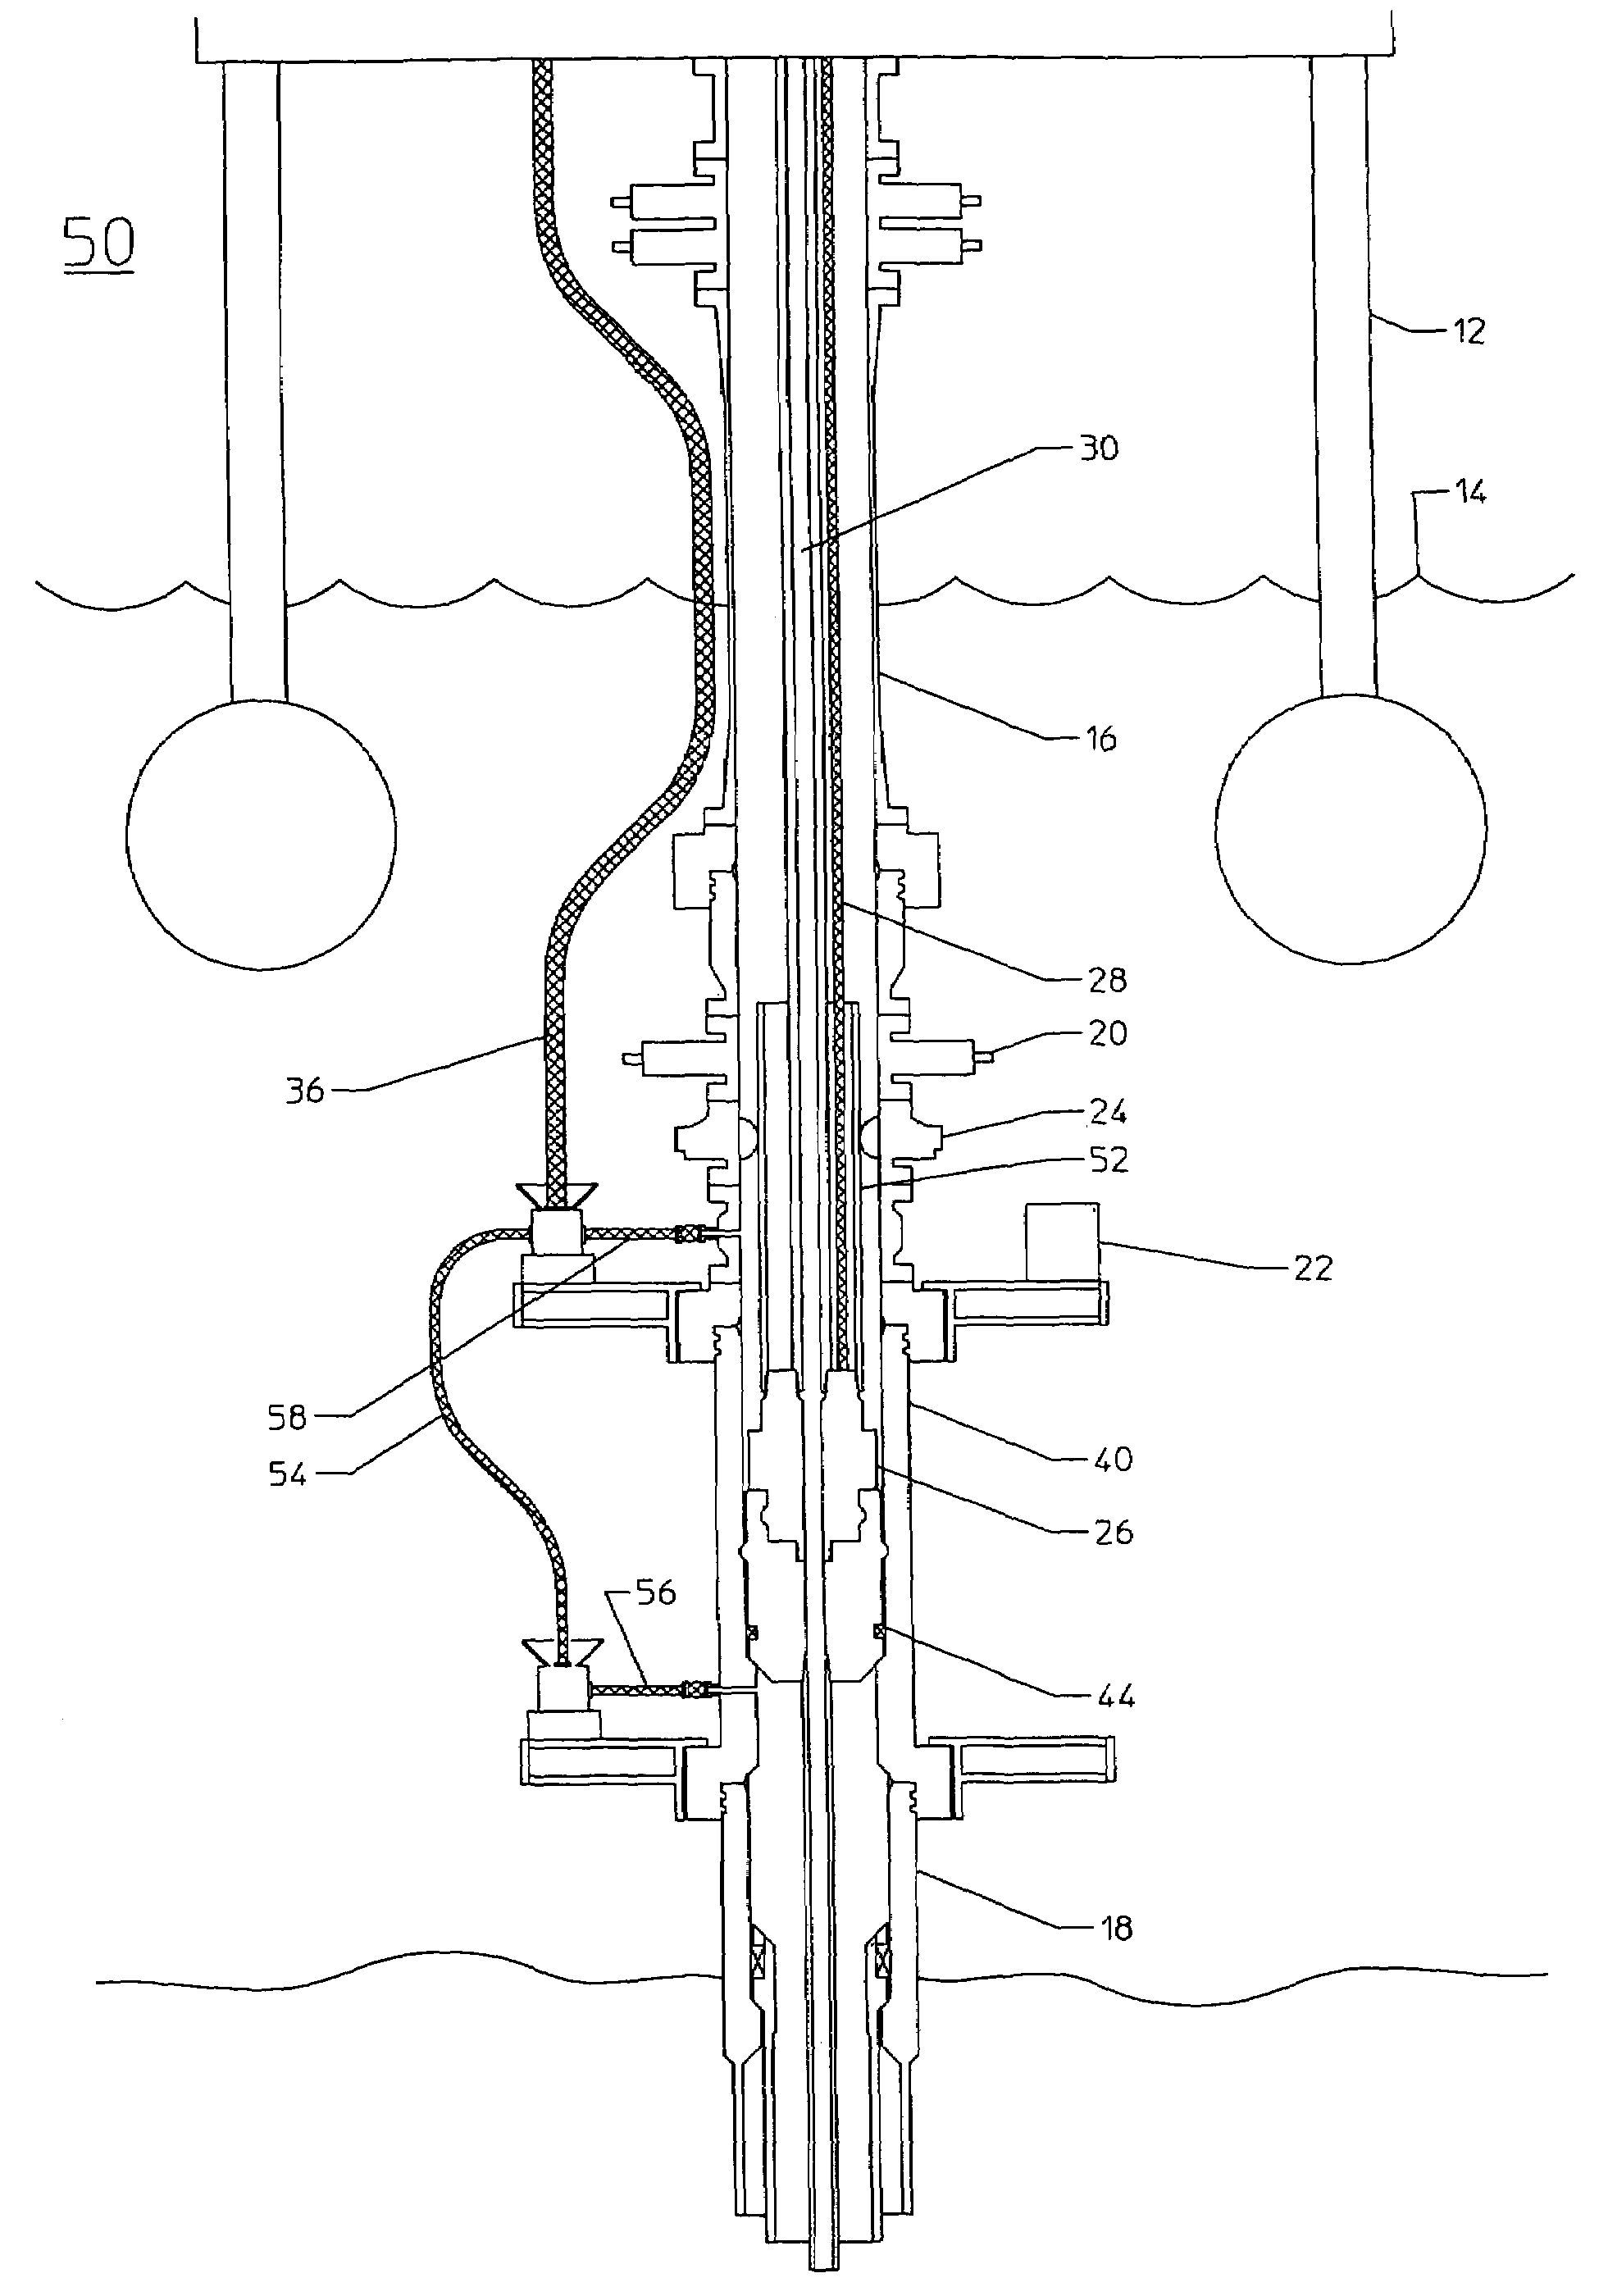 Method and apparatus for blow-out prevention in subsea drilling/completion systems